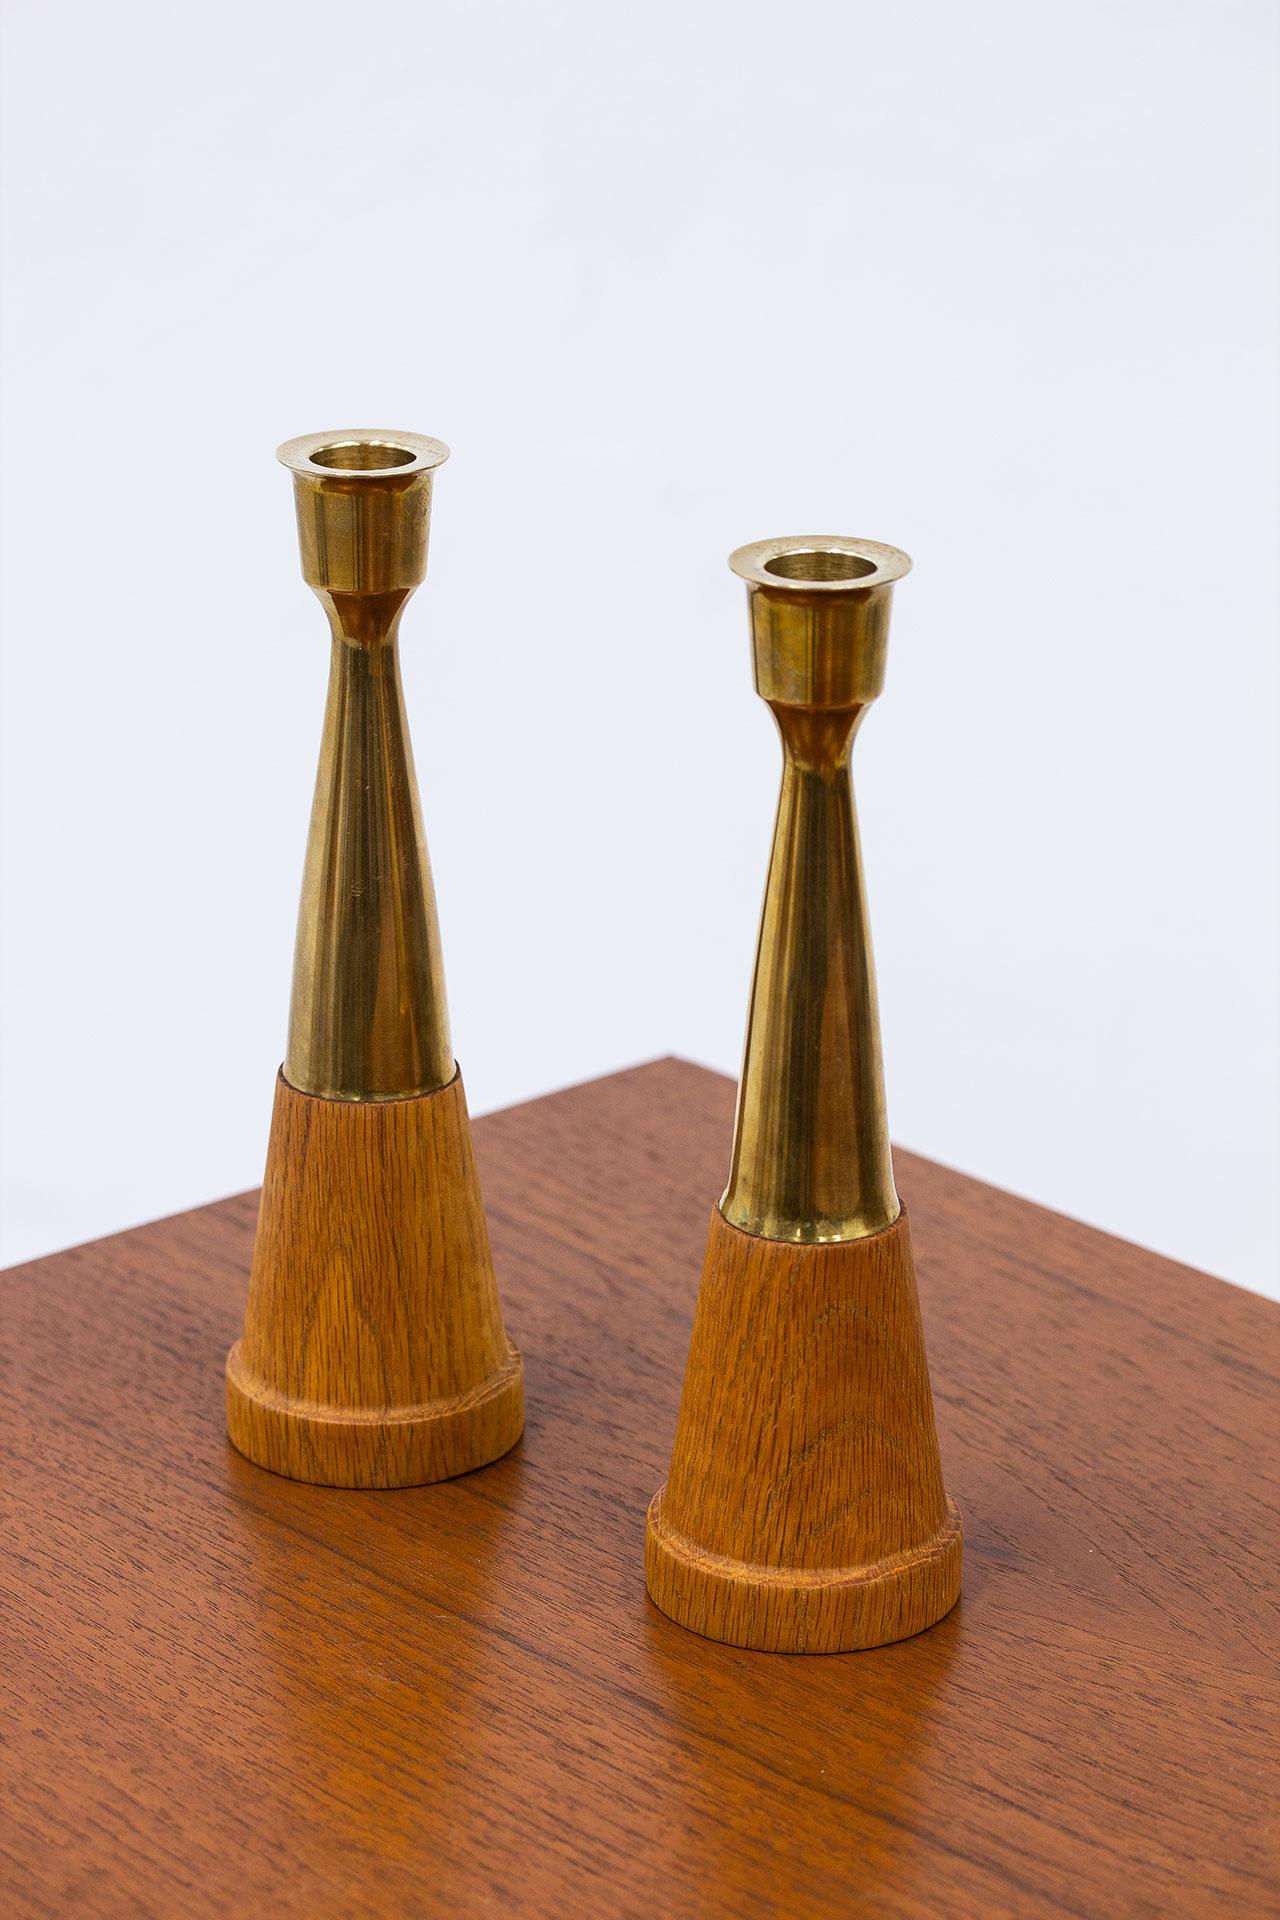 Pair of candleholders from unknown maker,
most  likely  Scandinavian  from  the  1960s.
Made from brass and oak. Very good vintage
condition. 